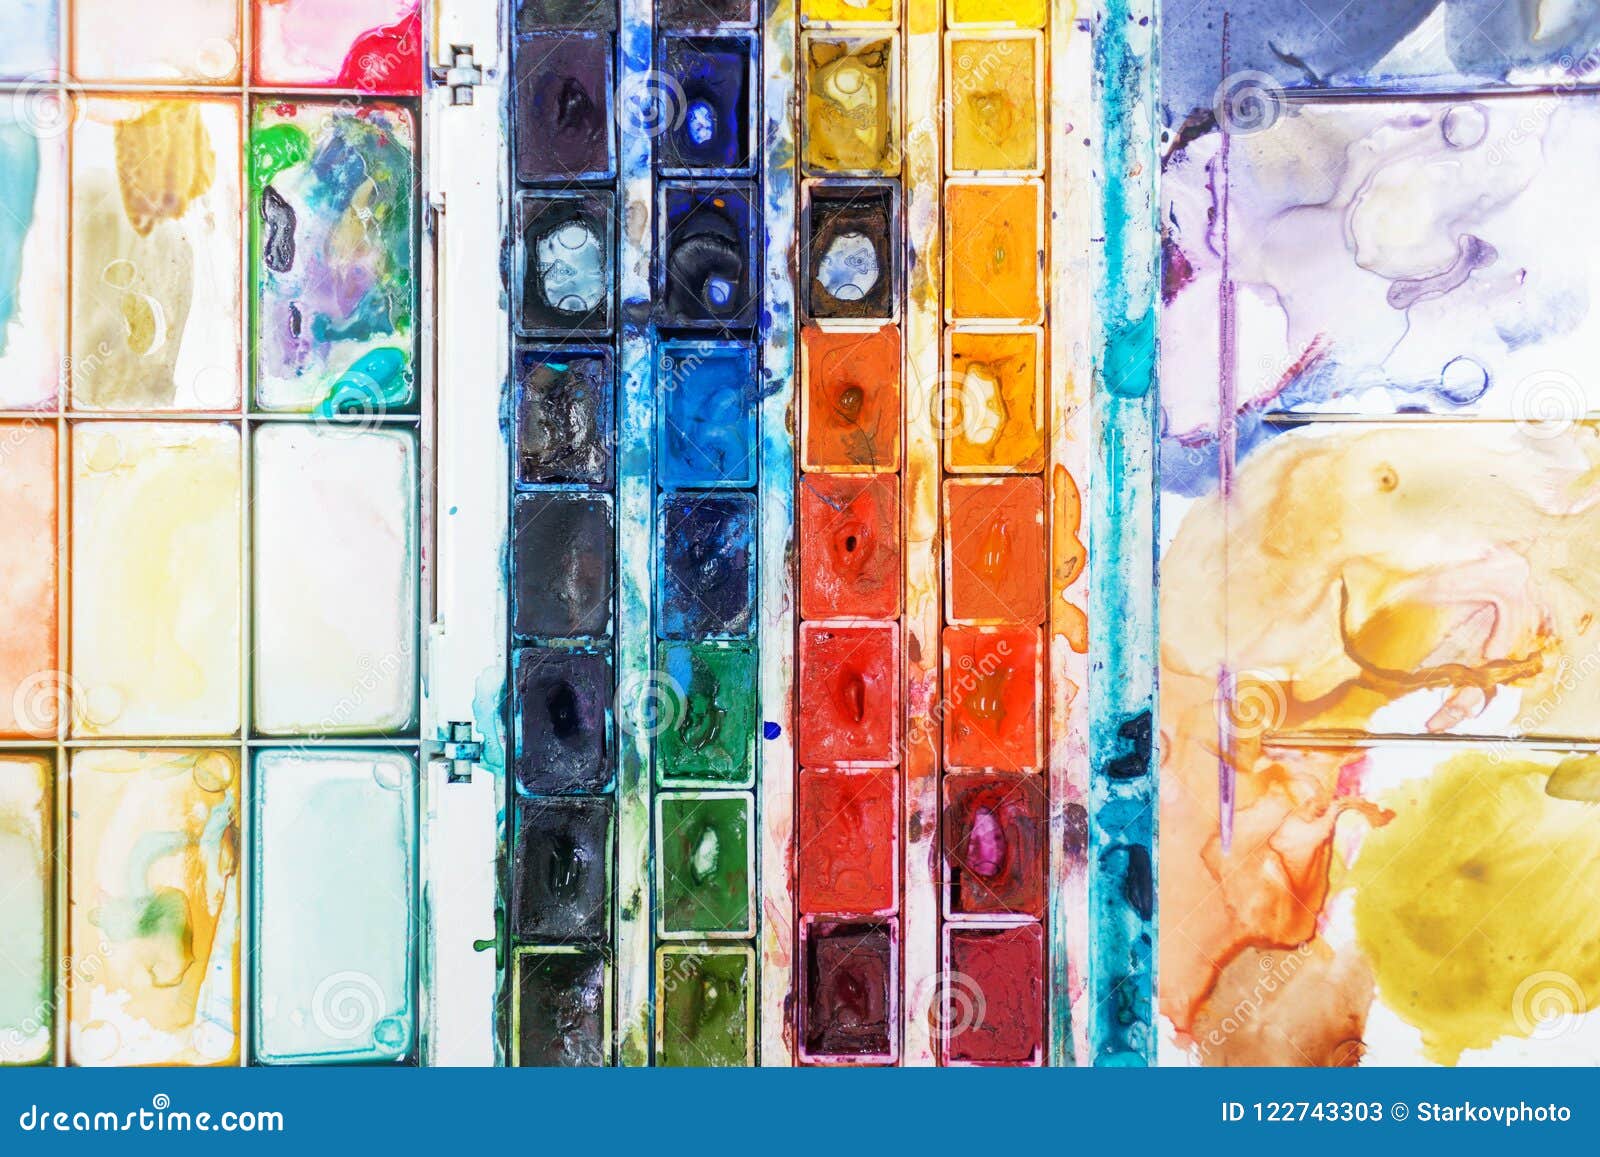 Top View Watercolor Paint. Wallpapers And An Abstract Background - A Concept For An Art School Or An Artist. Stock Image - Image Of Plastic, Multicolored: 122743303